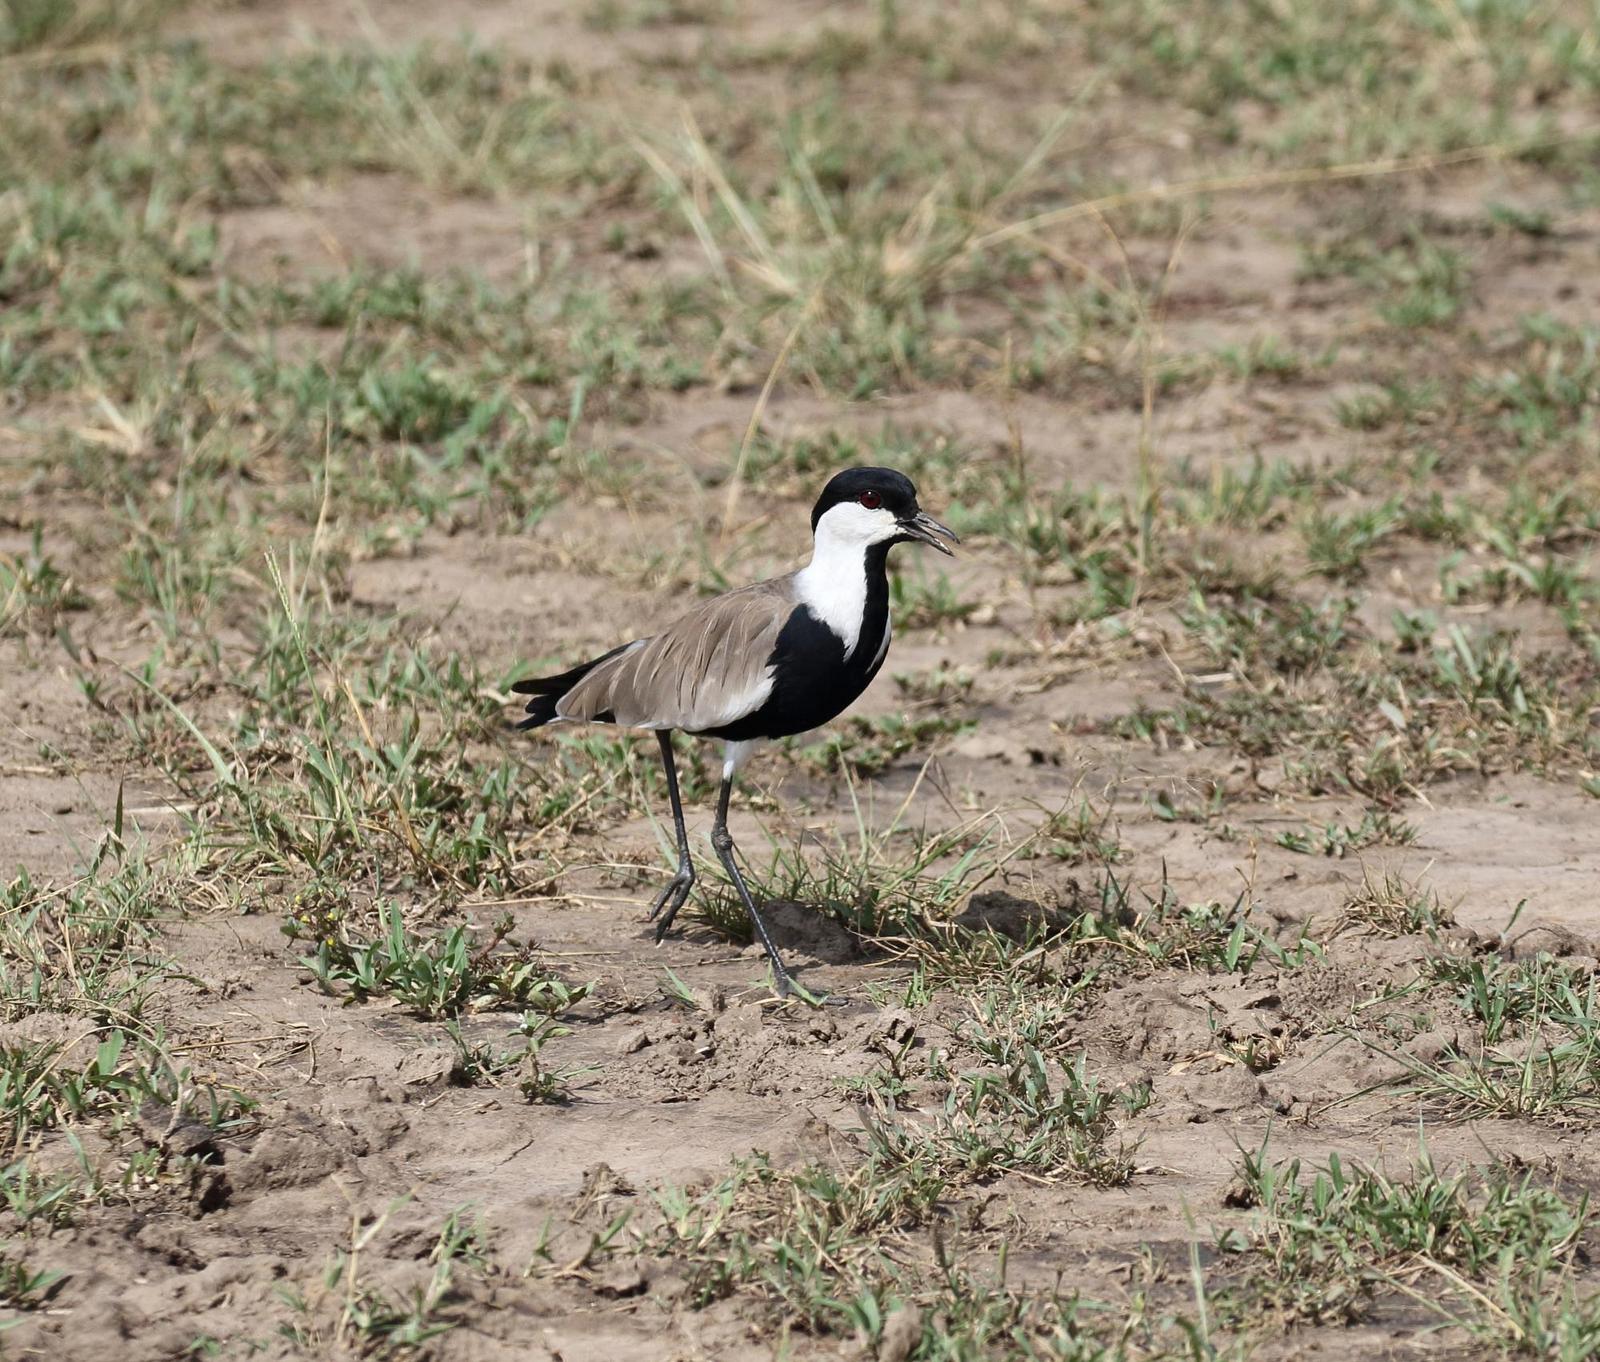 Spur-winged Lapwing Photo by Nate Dias